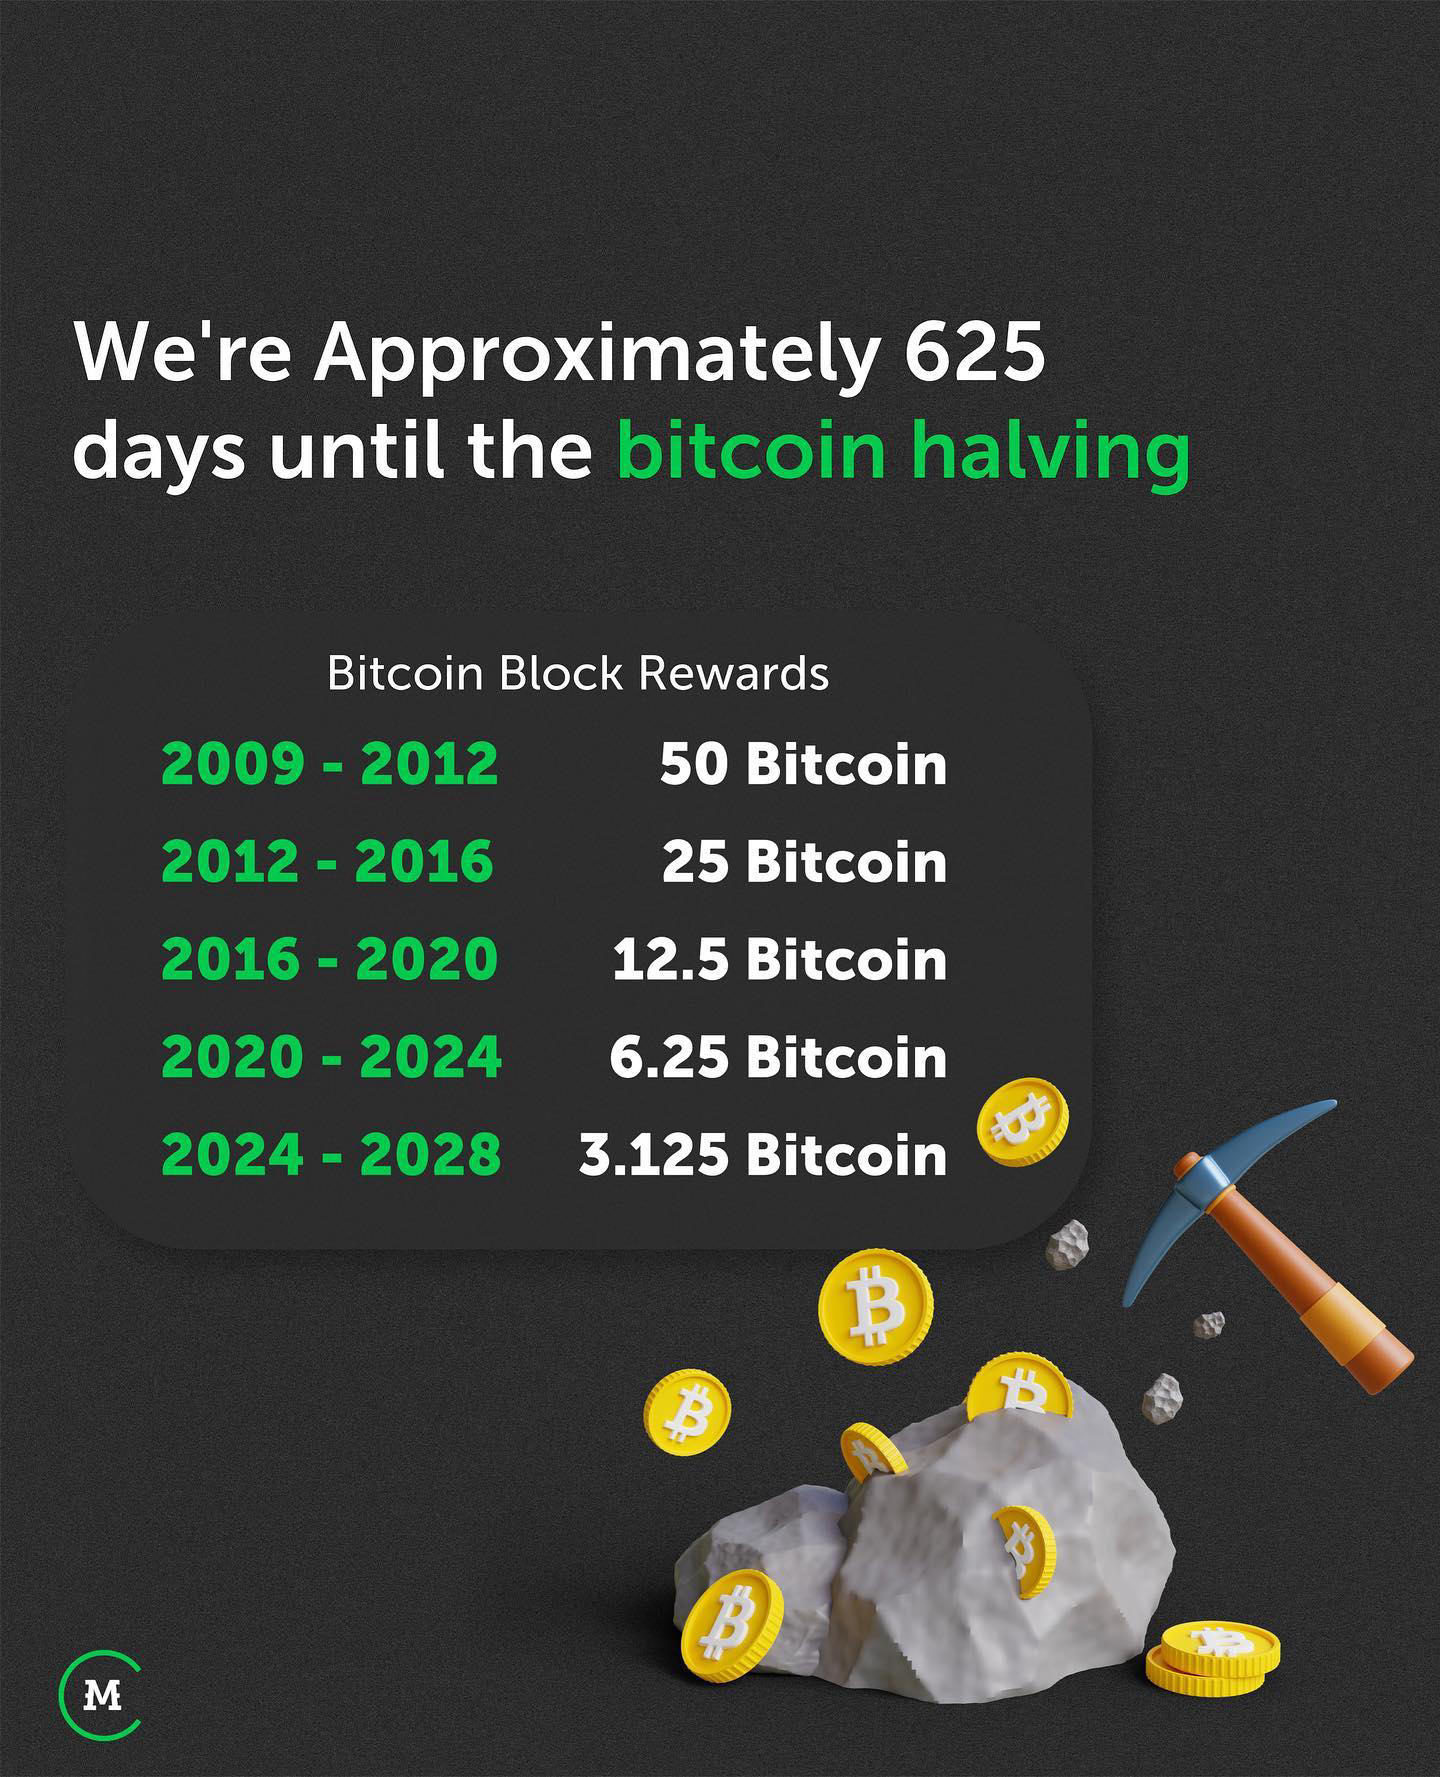 image  1 Bitcoin | Crypto | Blockchain - The next Bitcoin Halving will take place in approximately 625 days